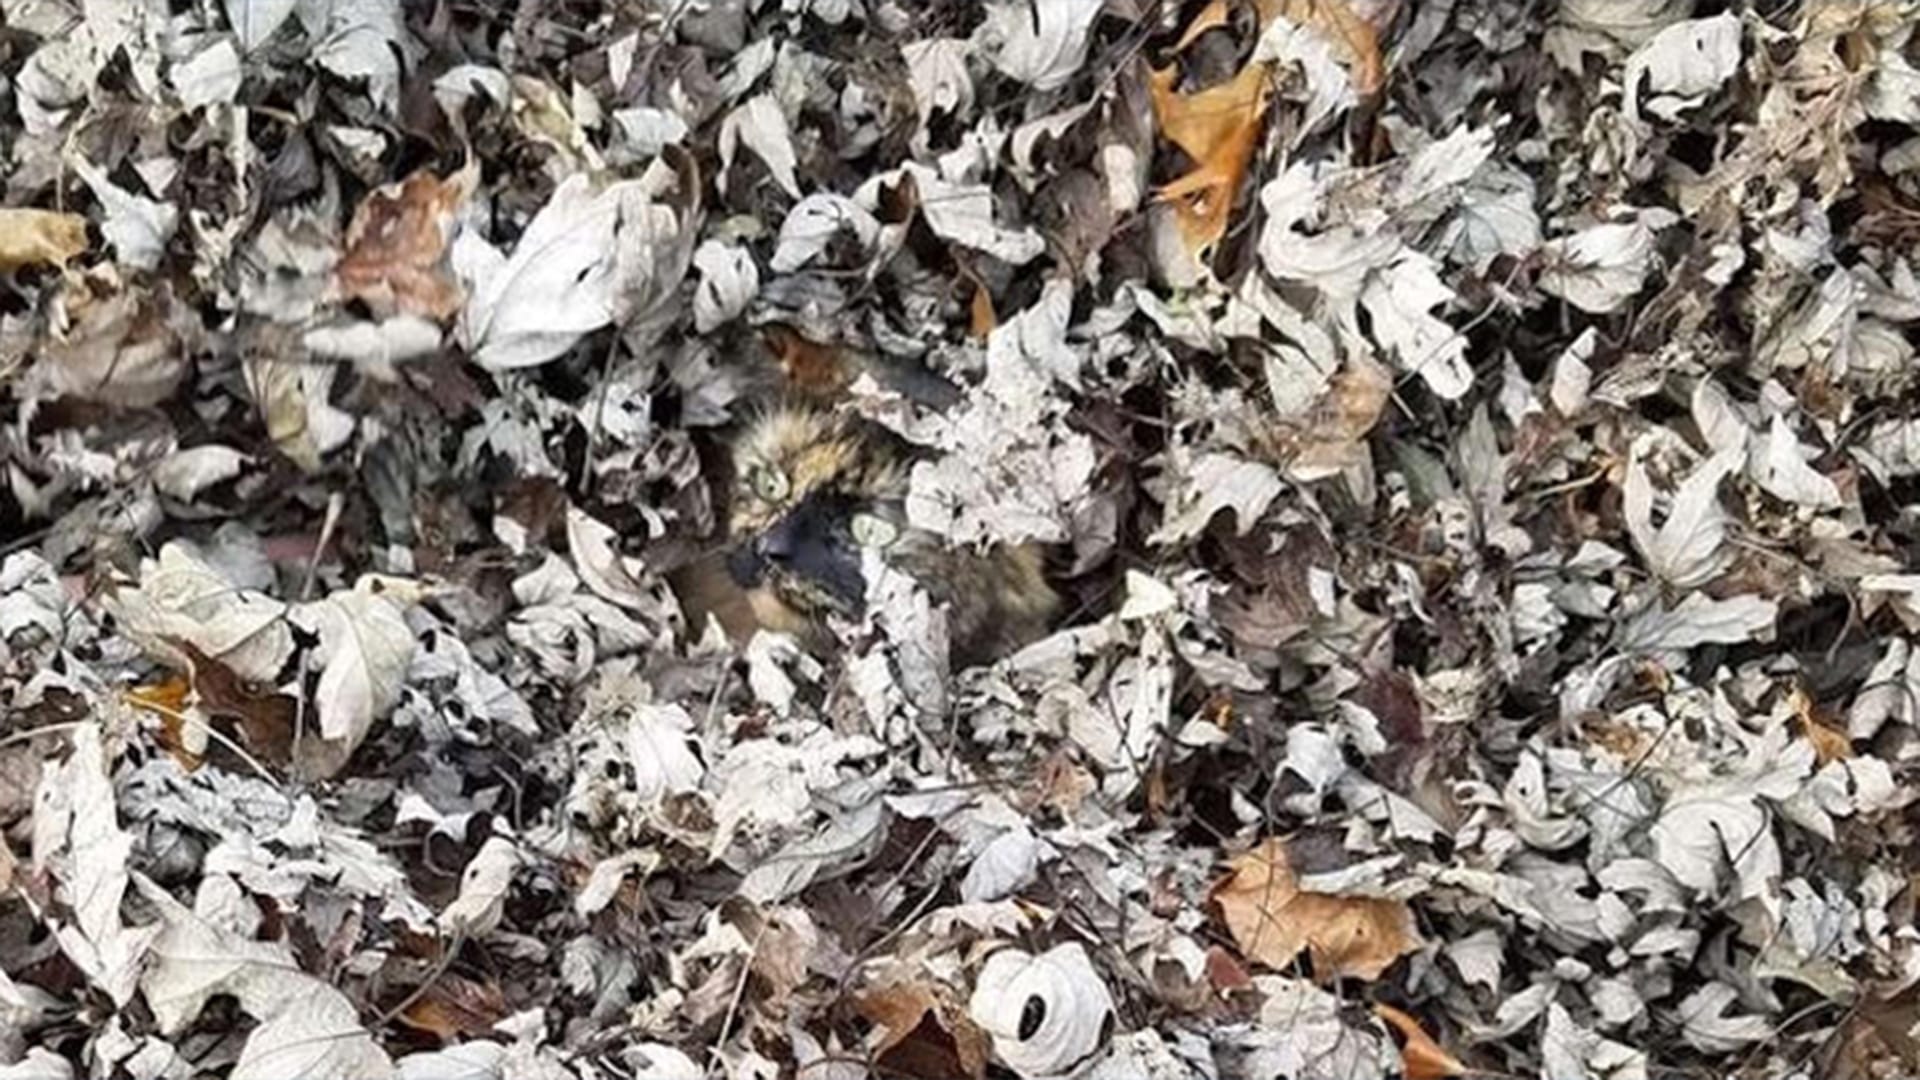 You have the eyes of a hawk if you can spot the cat hiding in the leaves in less than 10 seconds